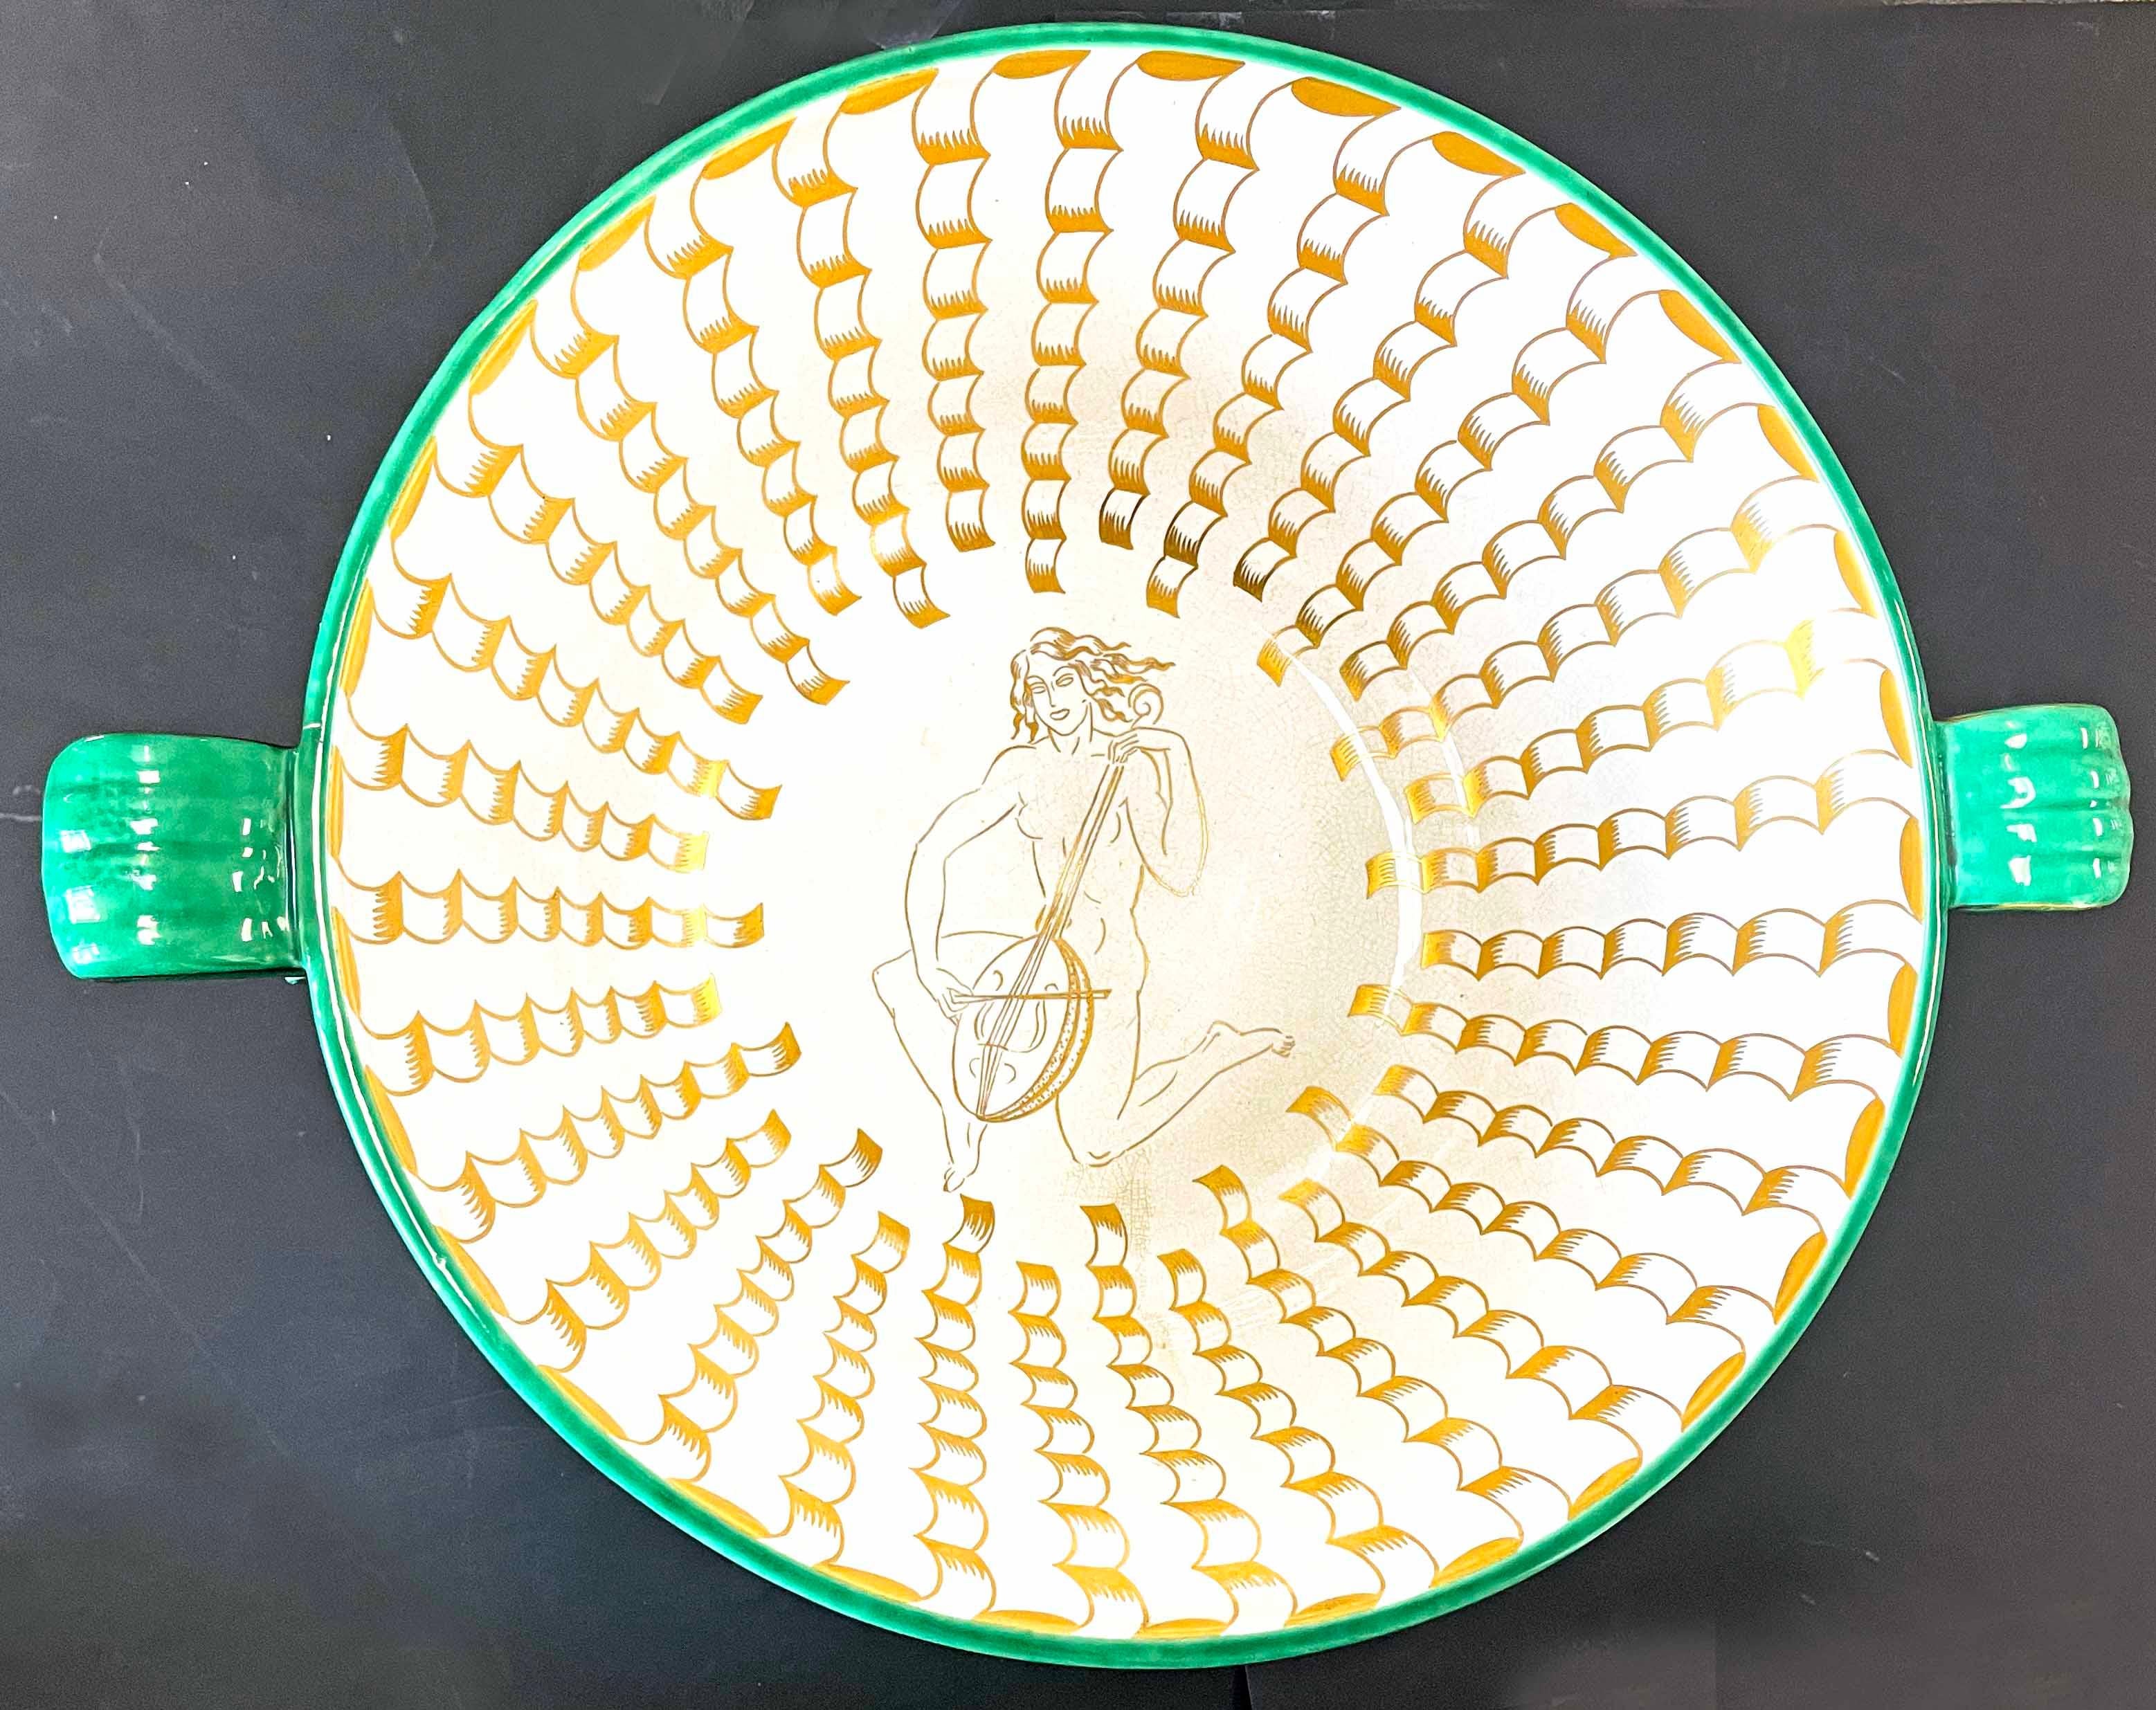 A spectacular example of Scandinavian Art Deco design, this punchbowl with geometric handles and figures of mermaids applied in gold over a jade-green ground is a very early example of Wilhelm Kåge's Argenta line of porcelain pieces for the